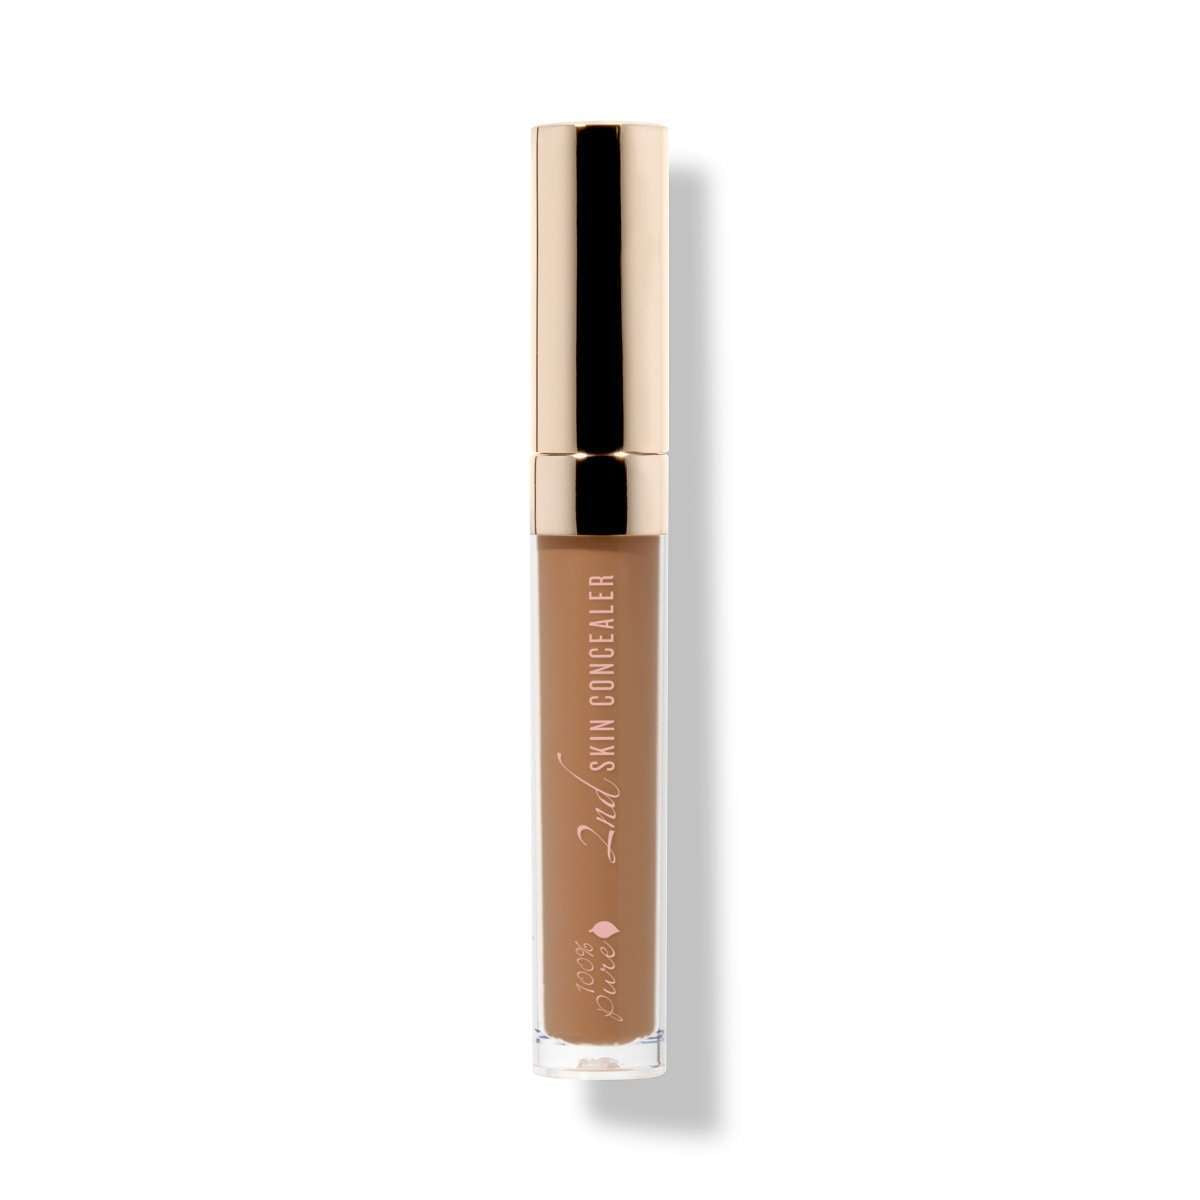 100% Pure® Fruit Pigmented® 2nd Skin Concealer, Shade 6